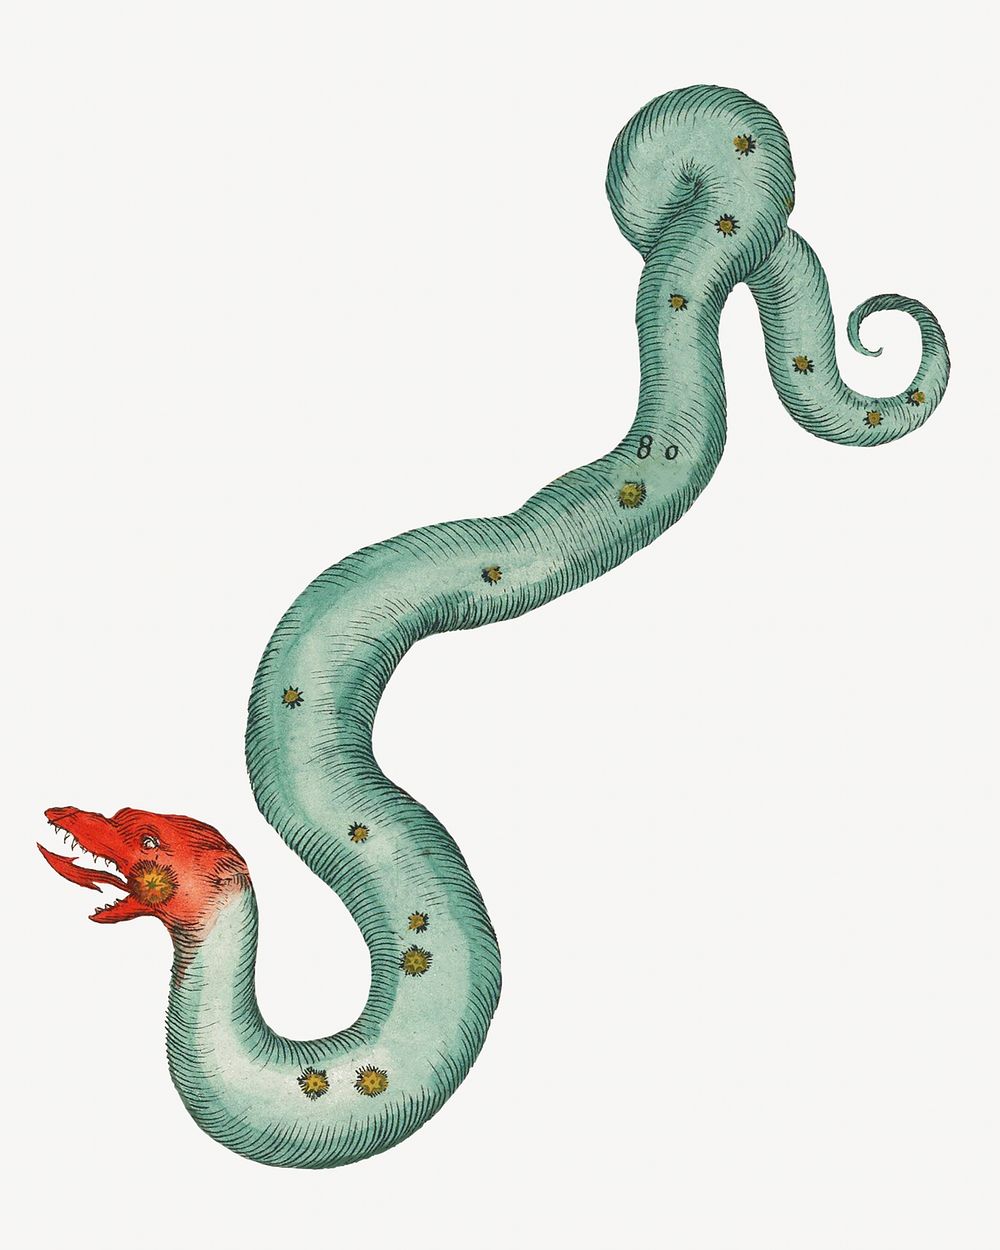 Hydrus snake constellation, astrology animal illustration by Ignace Gaston Pardies. Remixed by rawpixel.